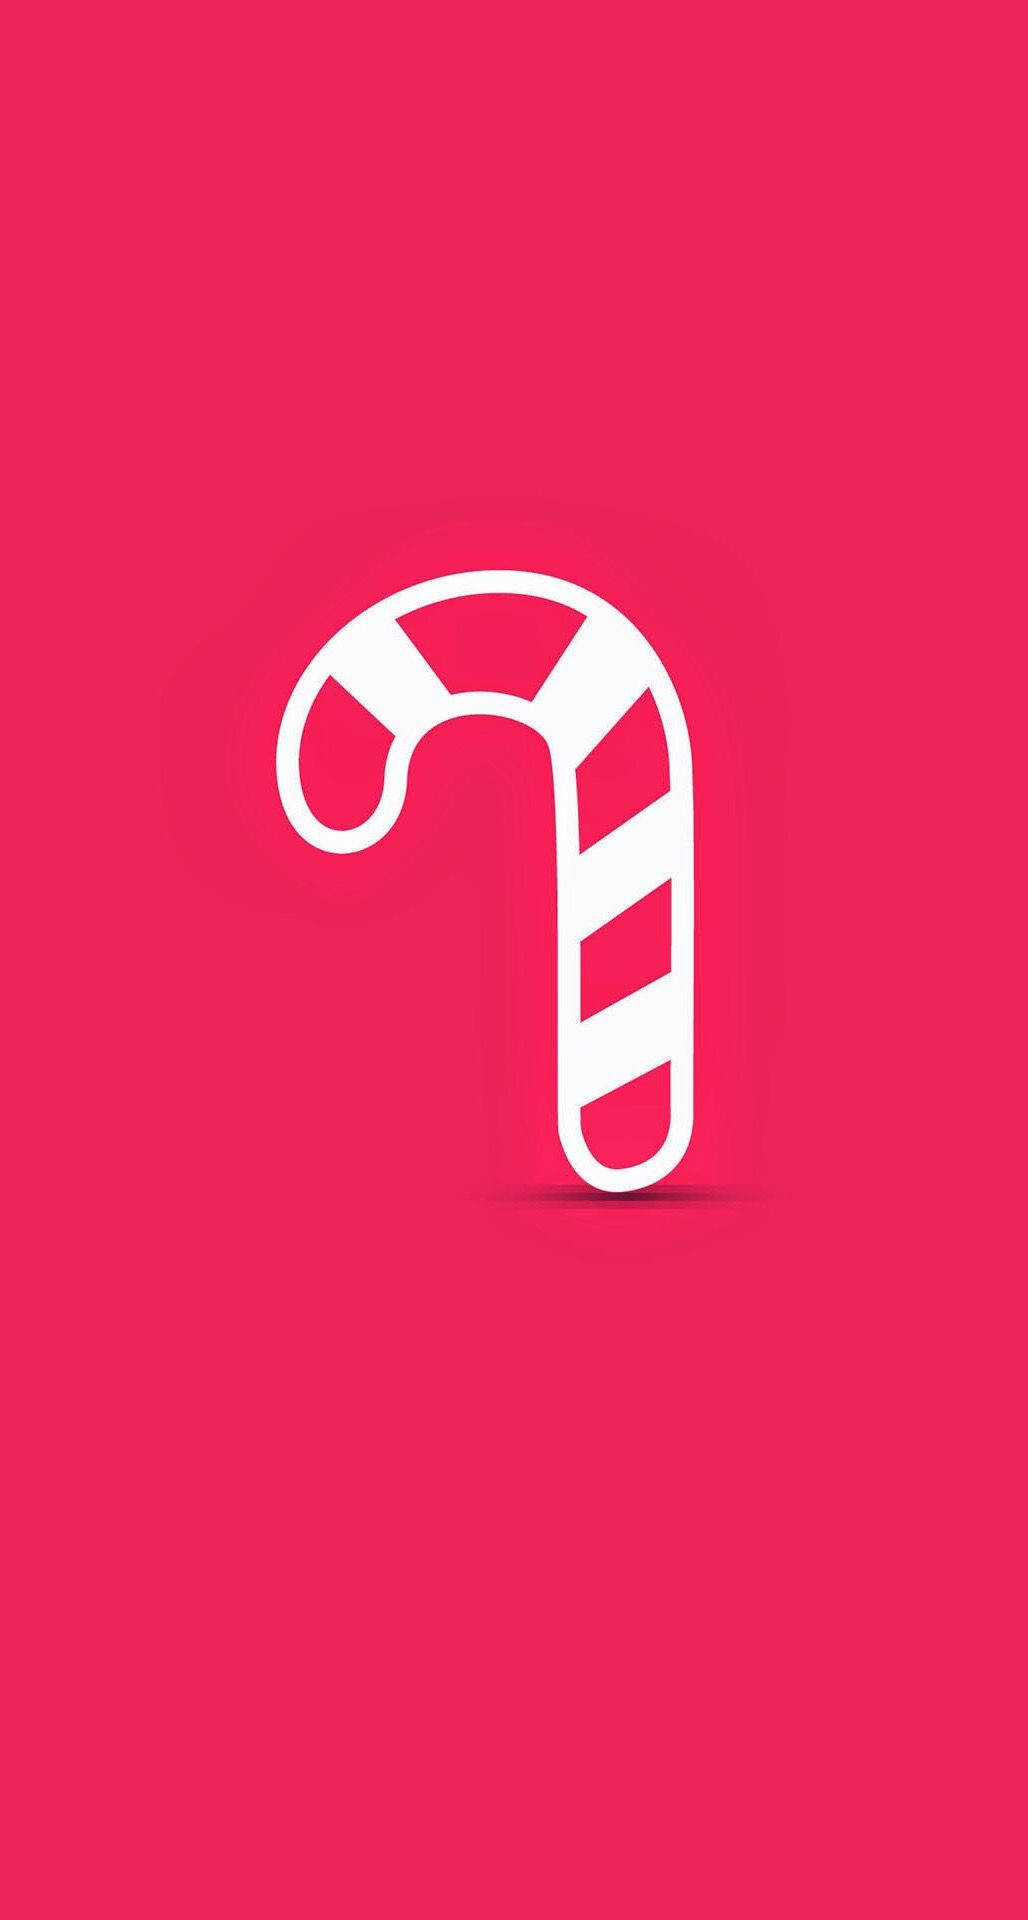 Tiny Candy Cane In Fuchsia Pink